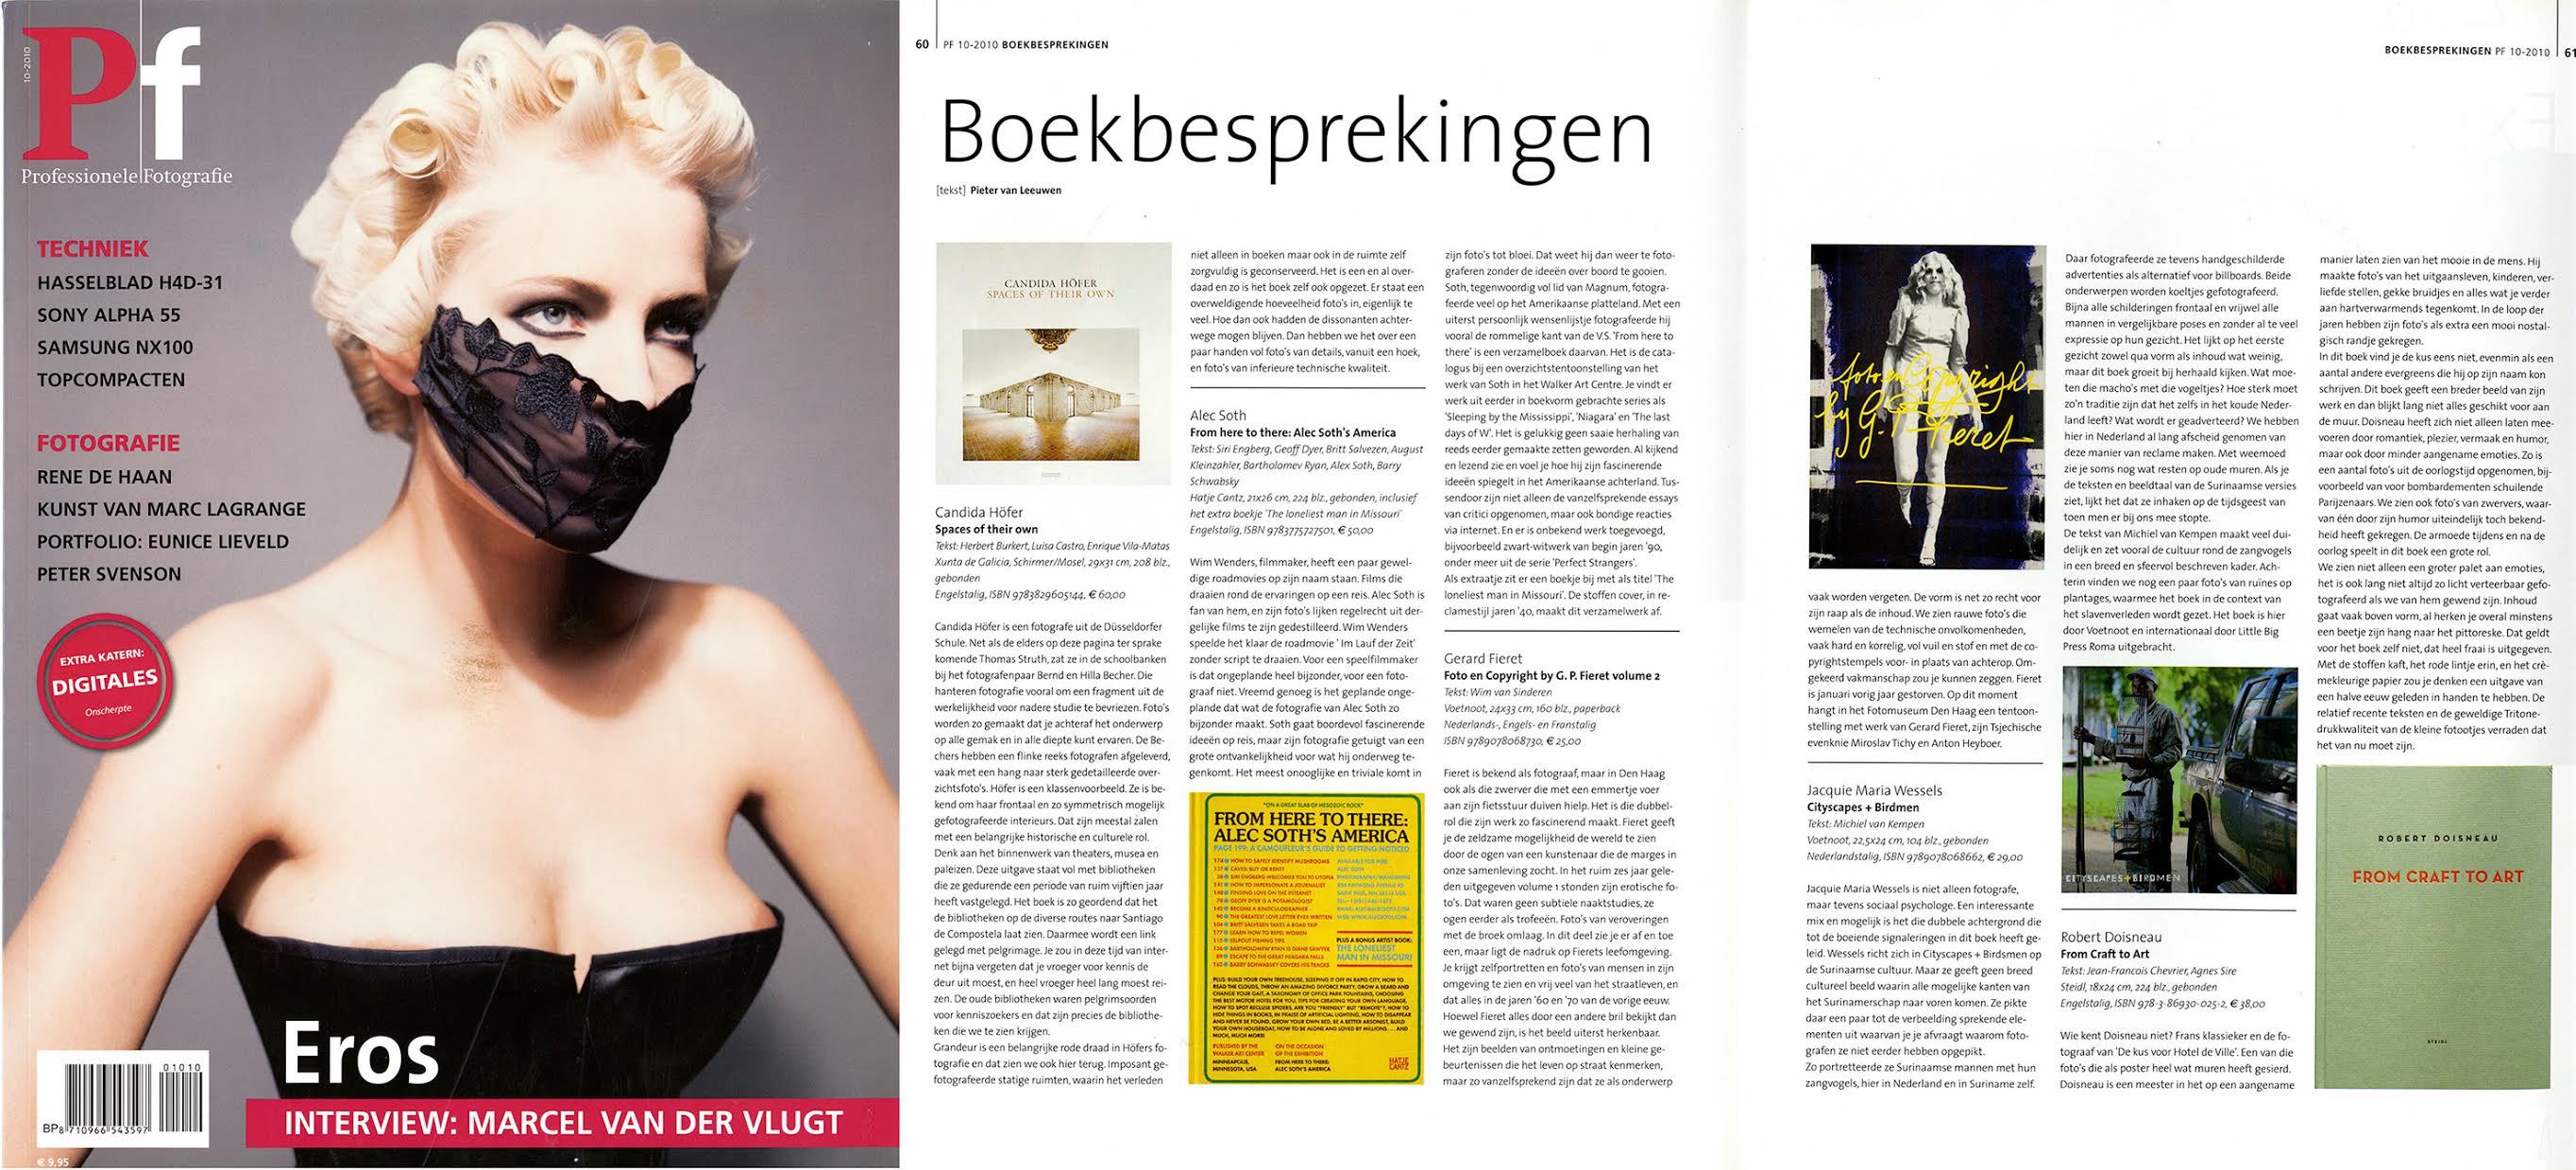 review pf magazine photo book cityscapes and birdman jacquie maria wessels